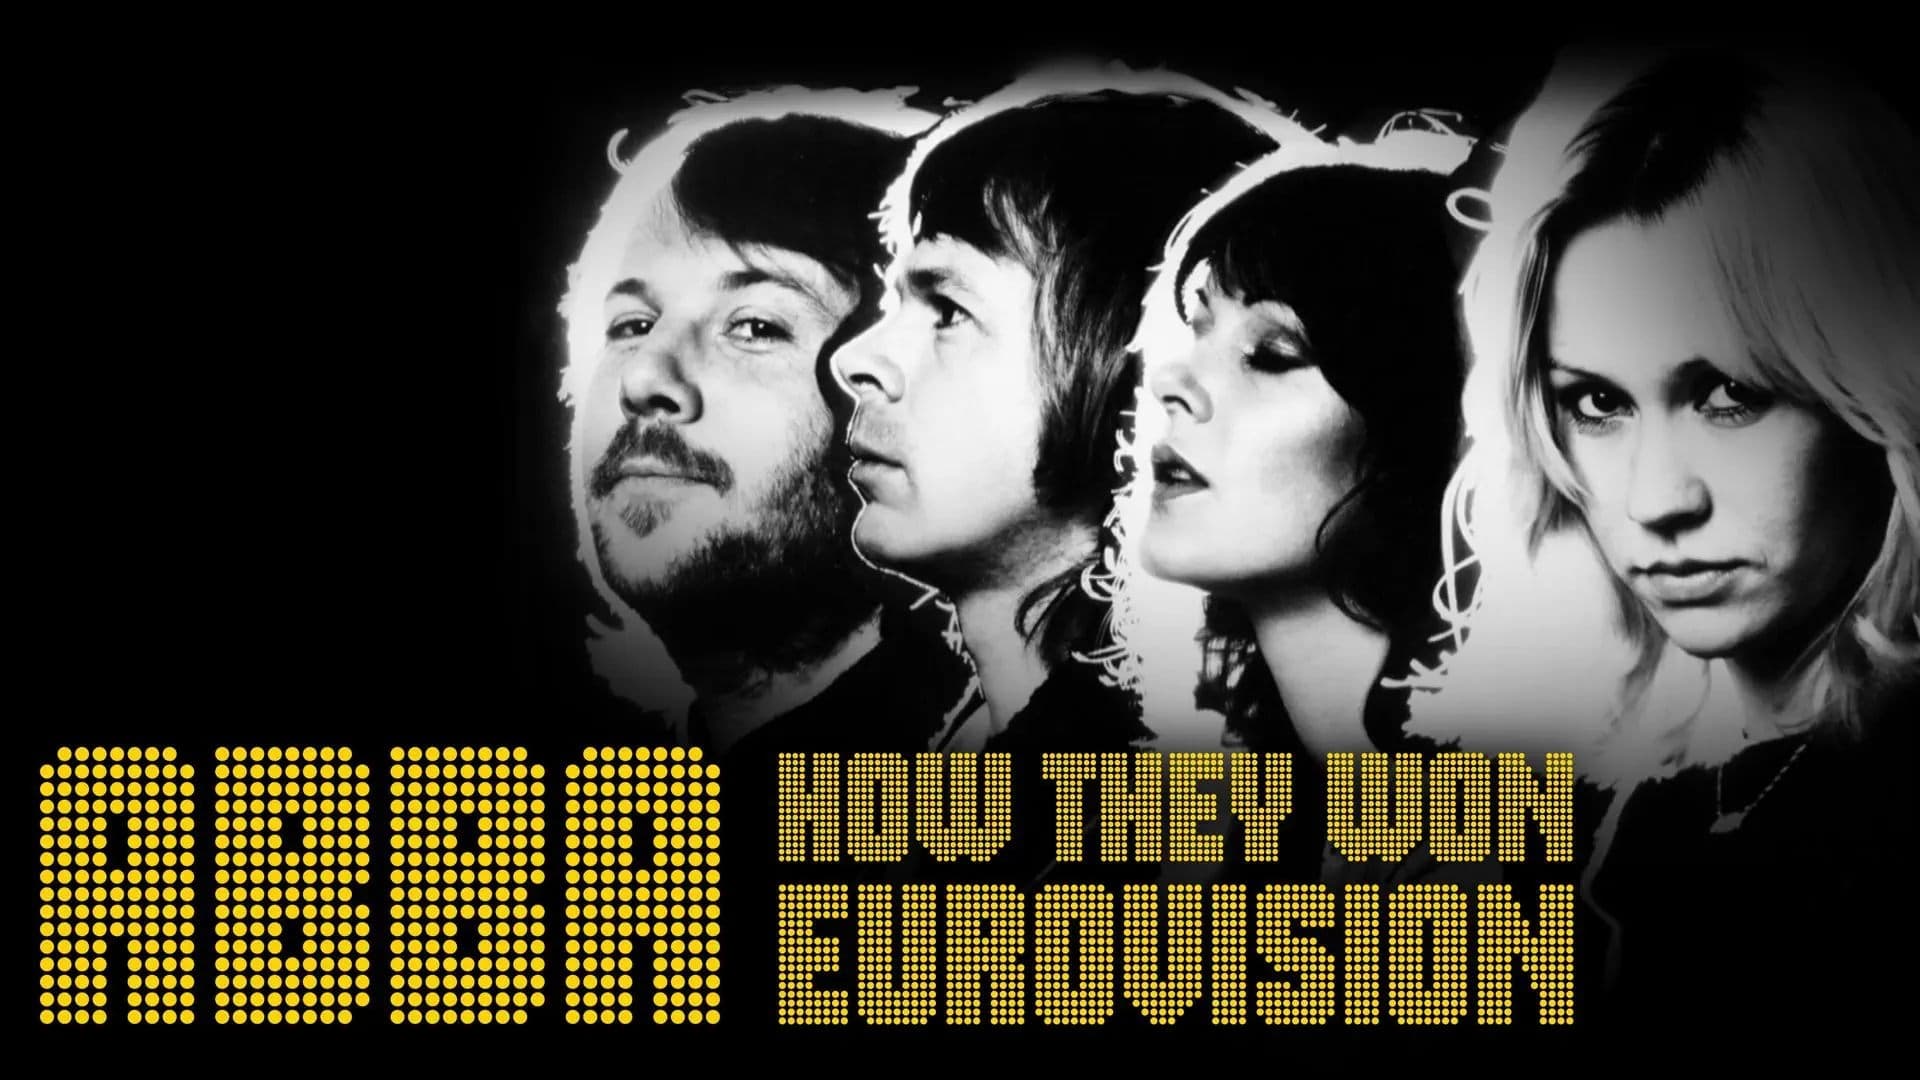 ABBA: How they won Eurovision (2024)